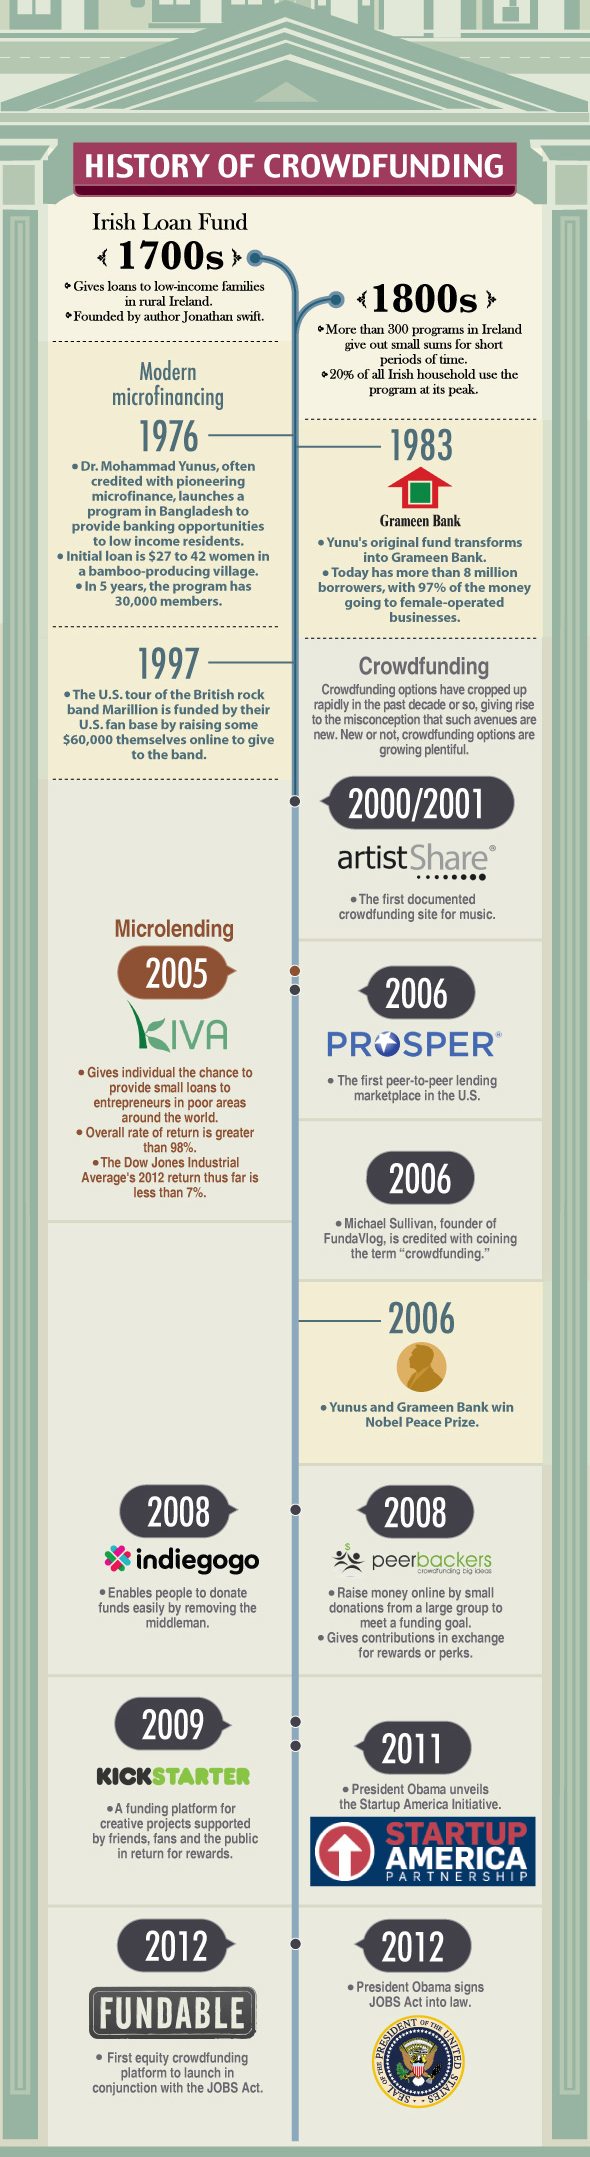 History of Crowdfunding Infographic Timeline